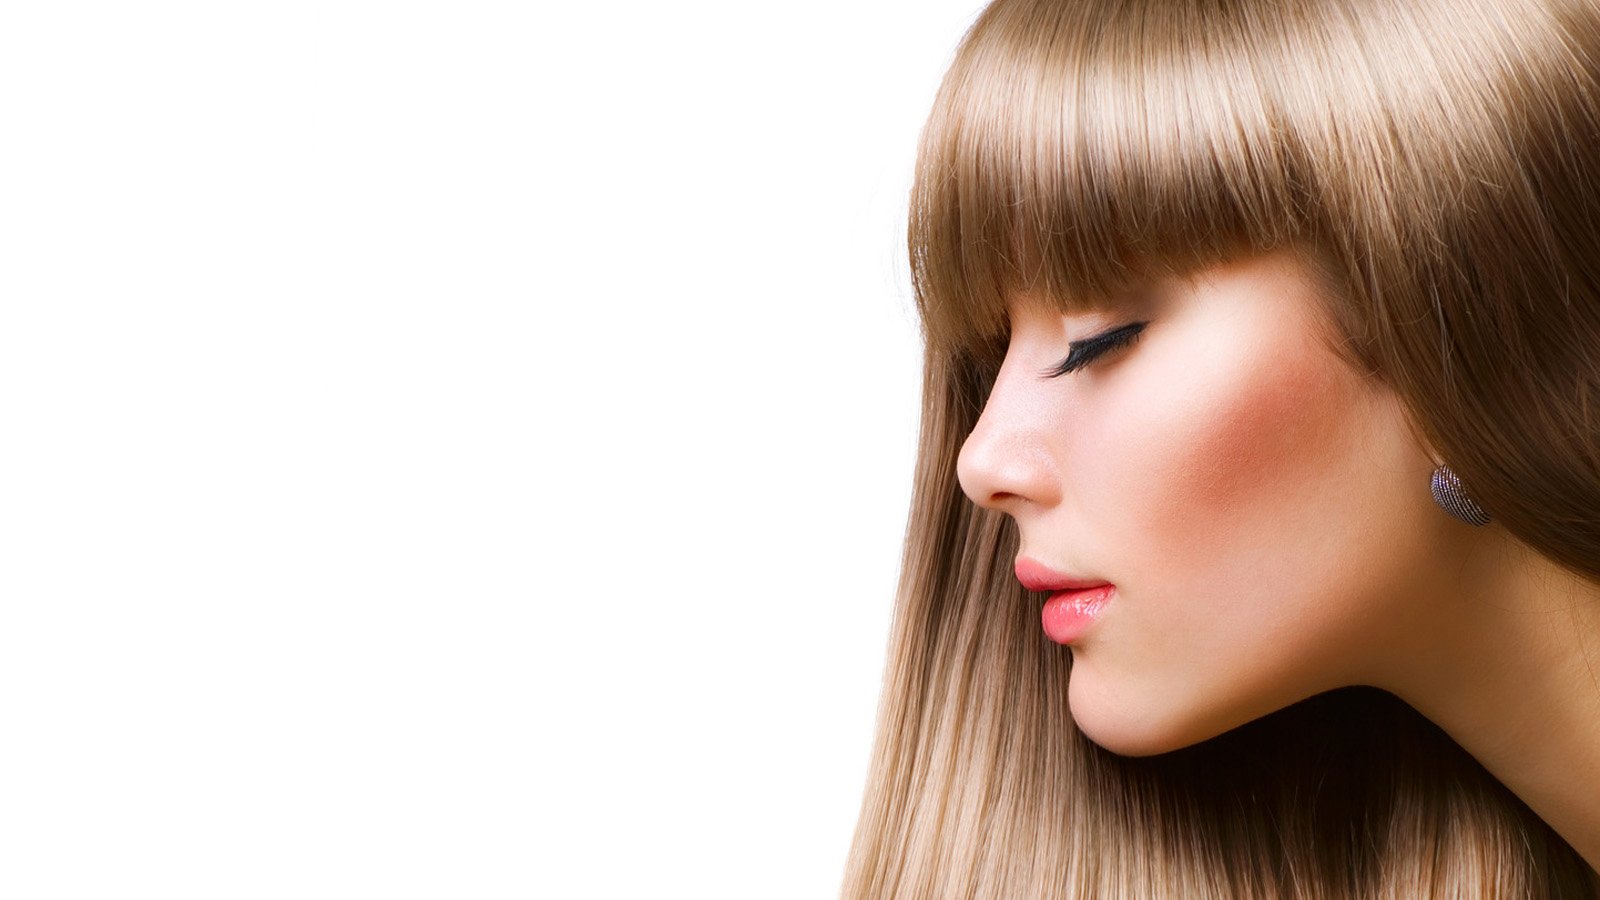 Home - A1Salon is a high end hair salon located in Cary, North Carolina.